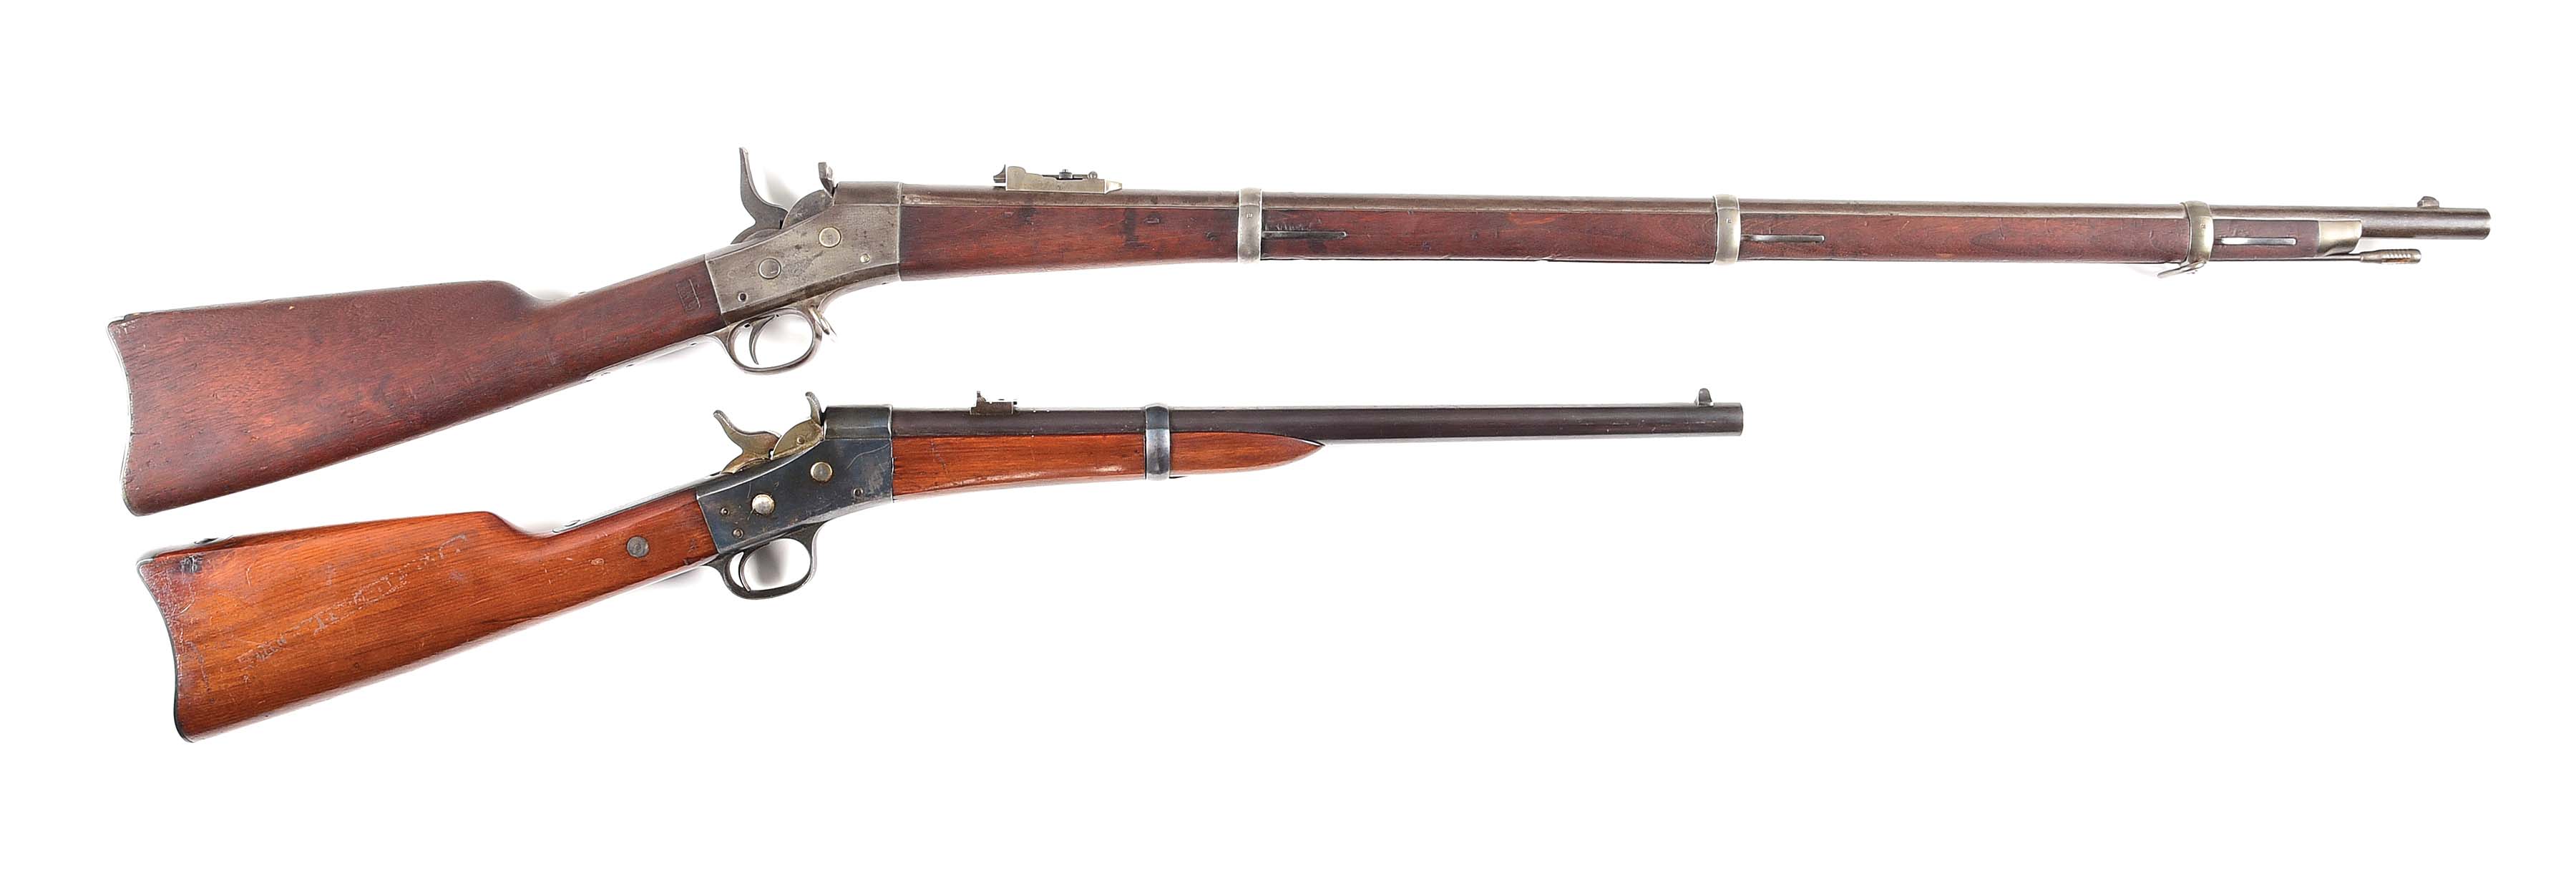 a-lot-of-2-new-york-state-national-guard-remington-rolling-block-rifle-and-re-auctions